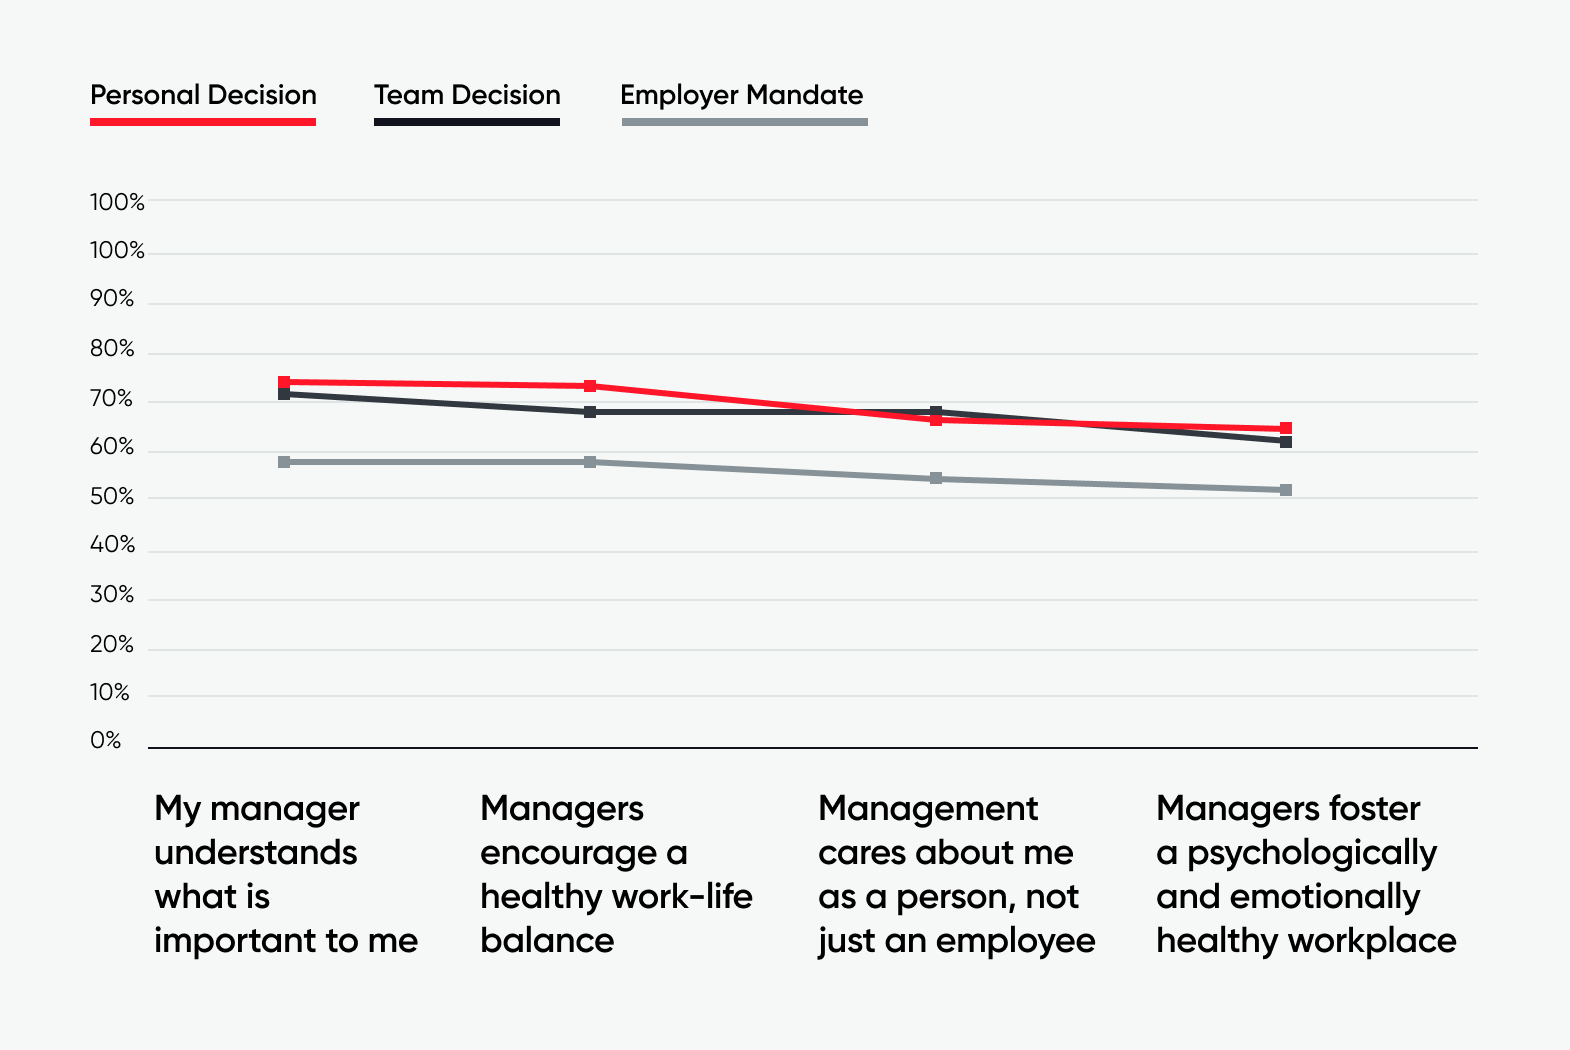 How employees with mandated work locations have a worse perception of managers and workplace 